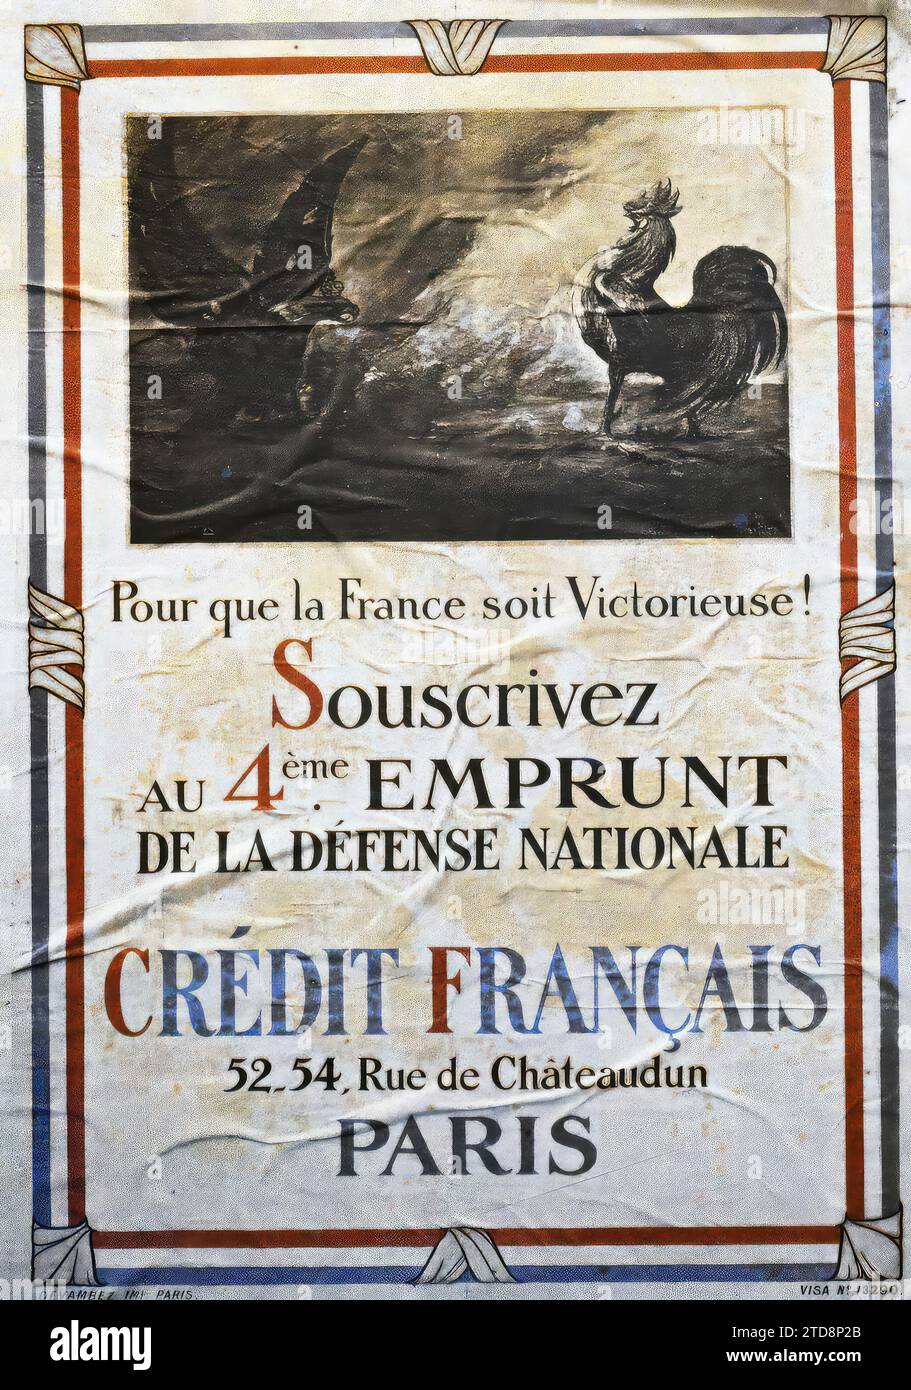 Paris, France Poster of the national loan, French Credit, Economic activity, Registration, information, First World War, Loan, Bank, finances, Poster, War effort, war work, France, Paris, Poster of the loan ( French Credit), Paris, 01/10/1918 - 31/10/1918, Léon, Auguste, photographer, Autochrome, photo, Glass, Autochrome, photo, Positive, Vertical, Size 9 x 12 cm Stock Photo